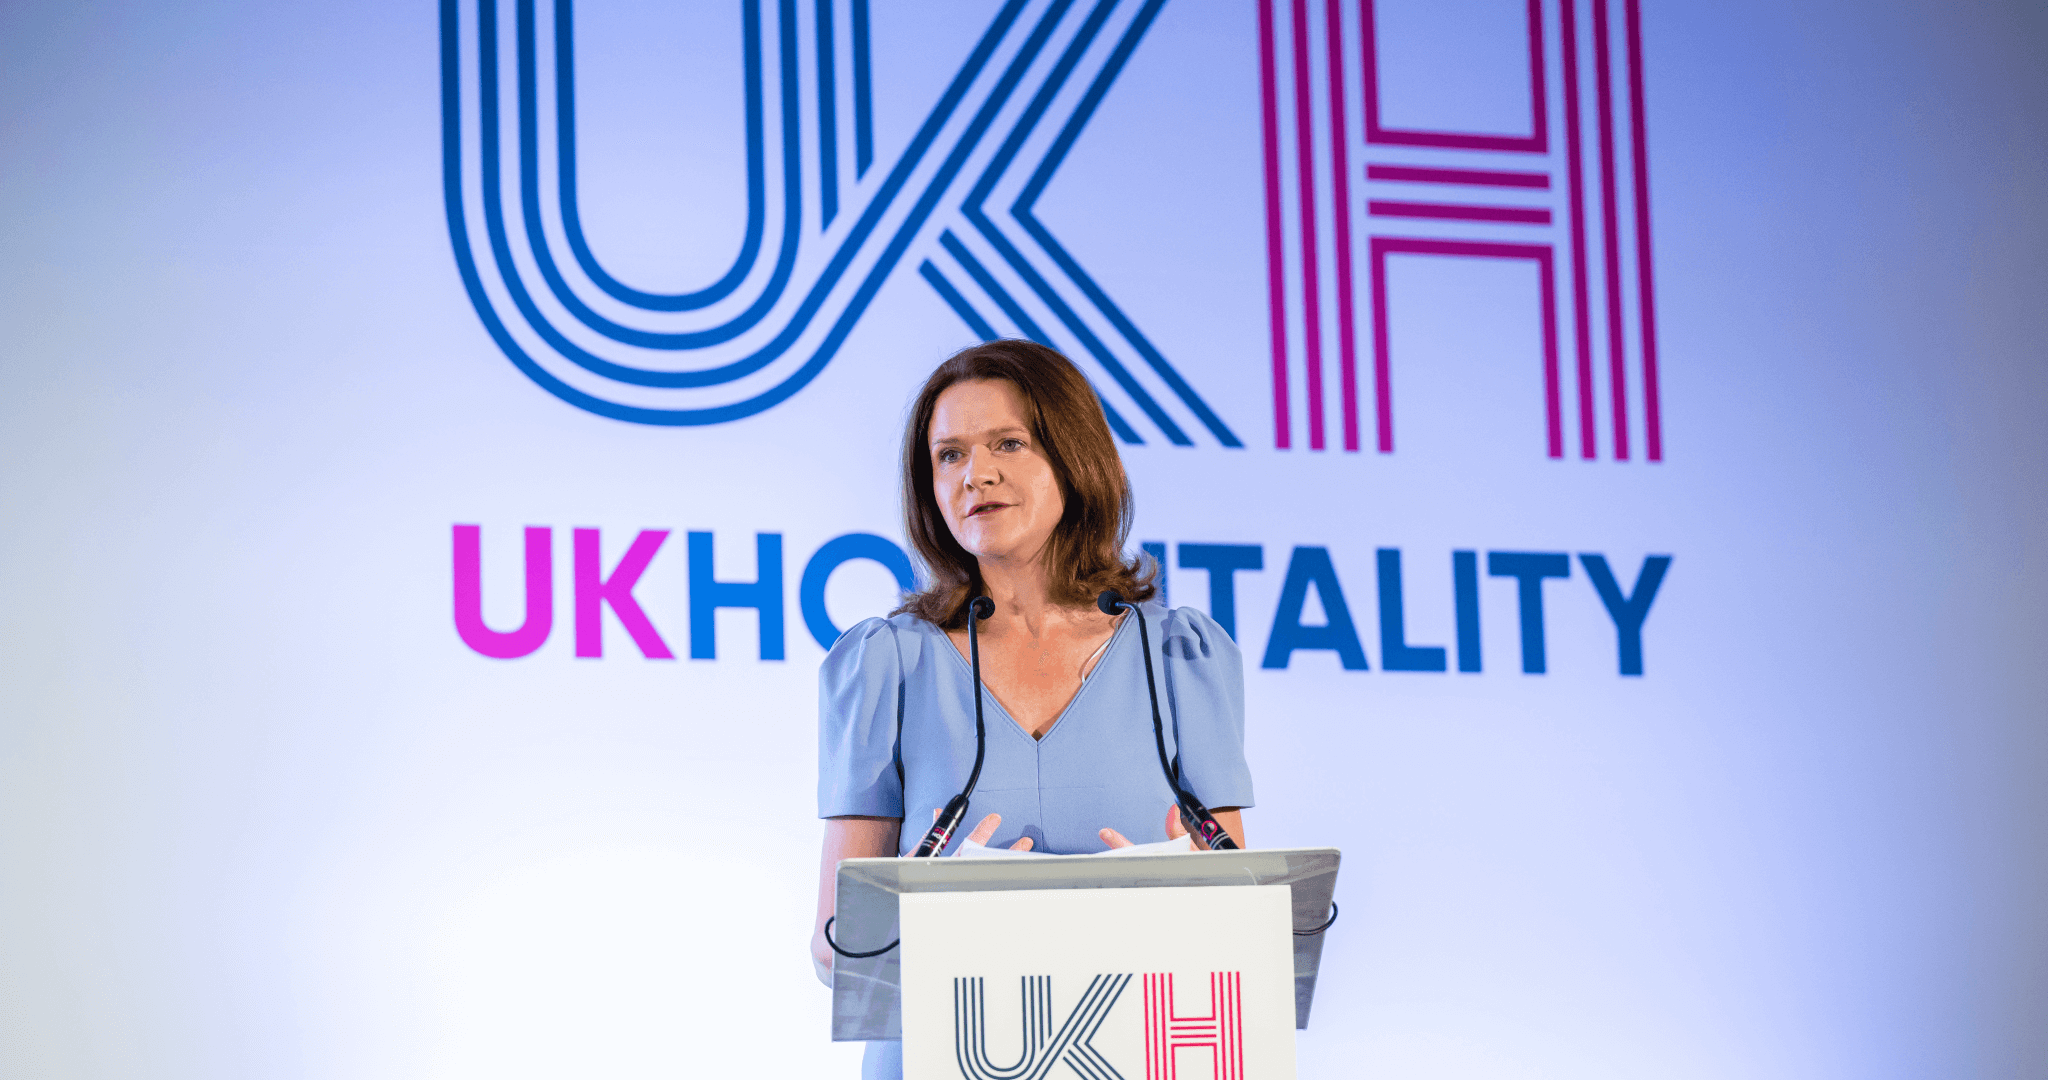 Kate Nicholls chair of UK Hospitality on stage